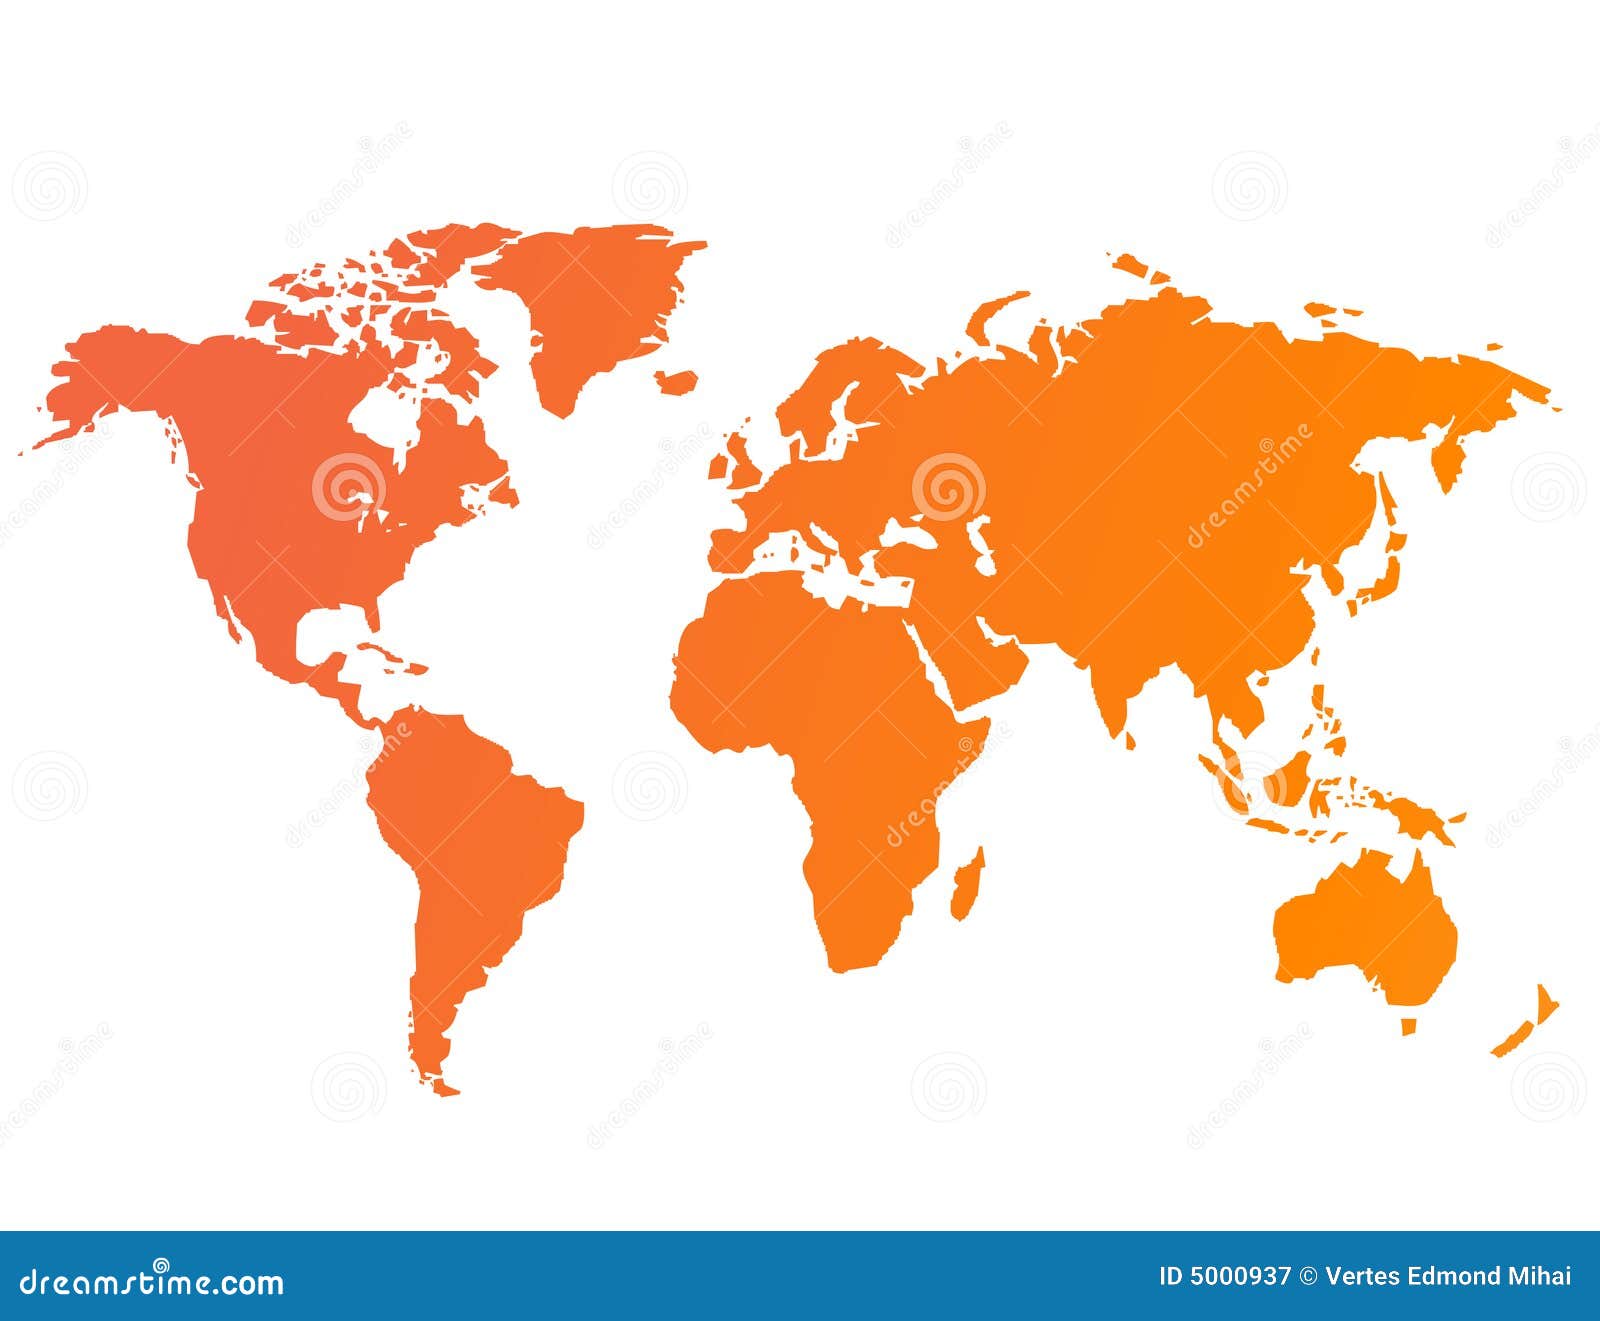 World map vector stock vector. Illustration of continental - 5000937